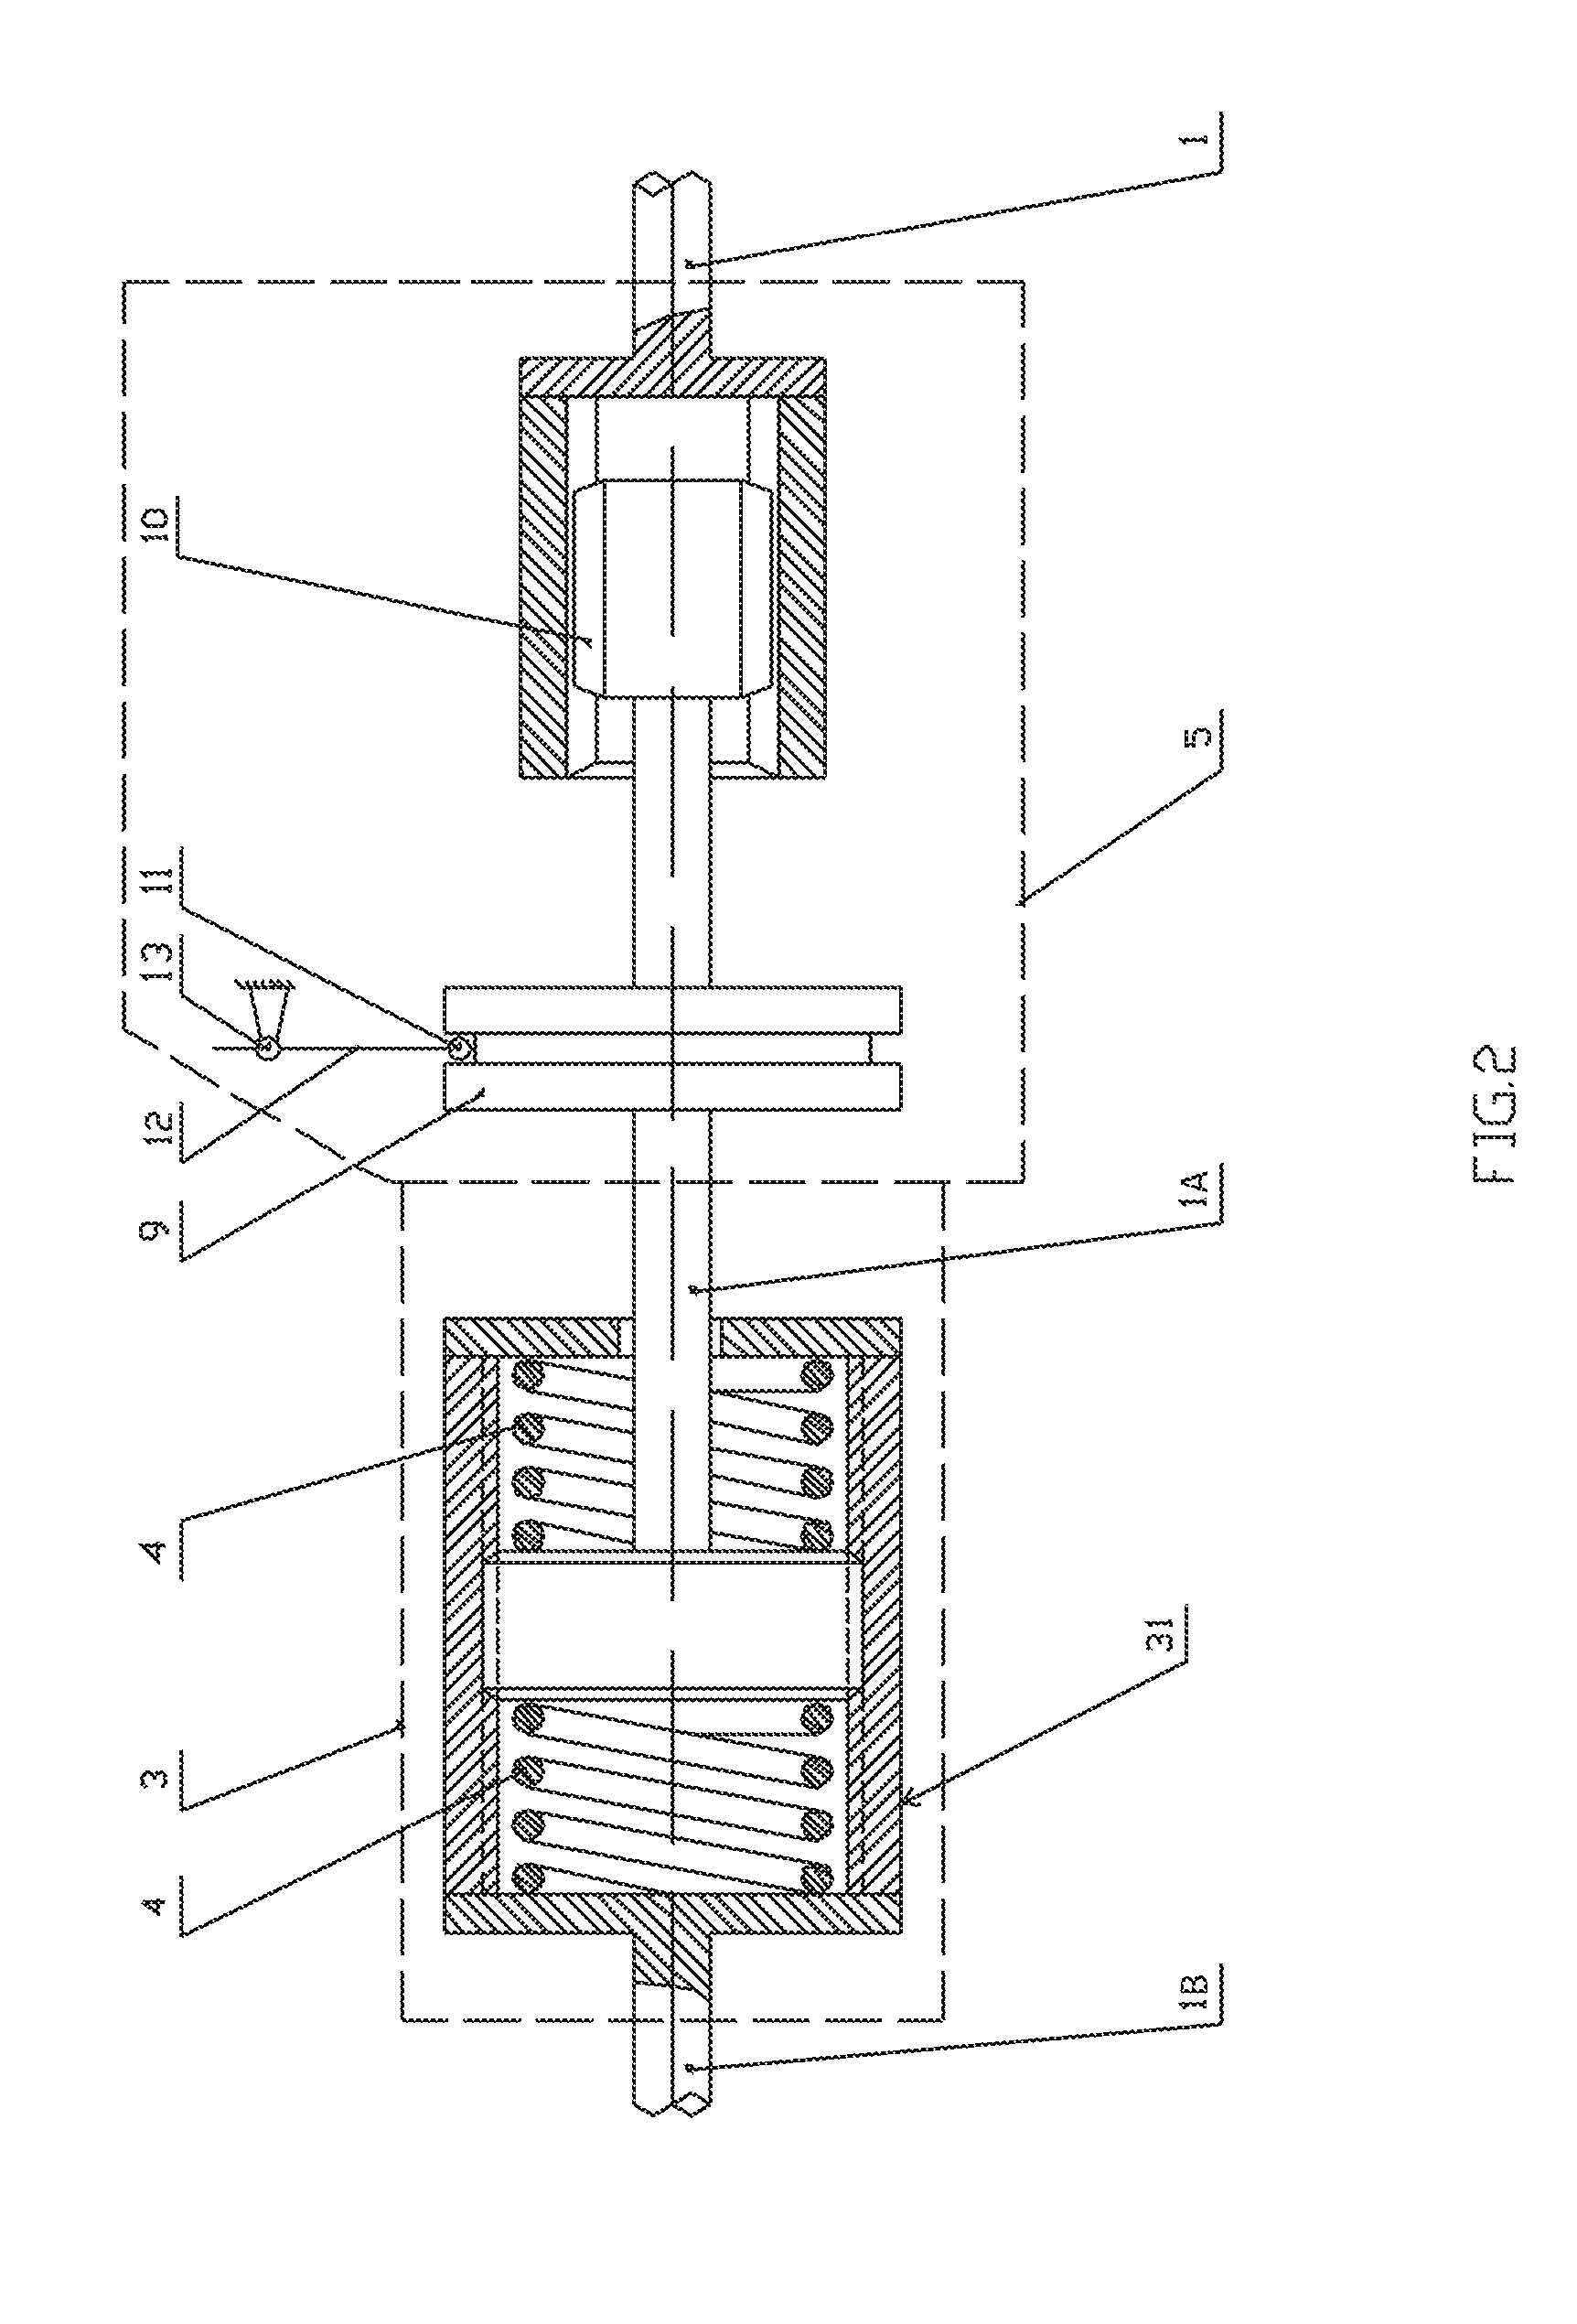 System for Controlling Torque Distribution